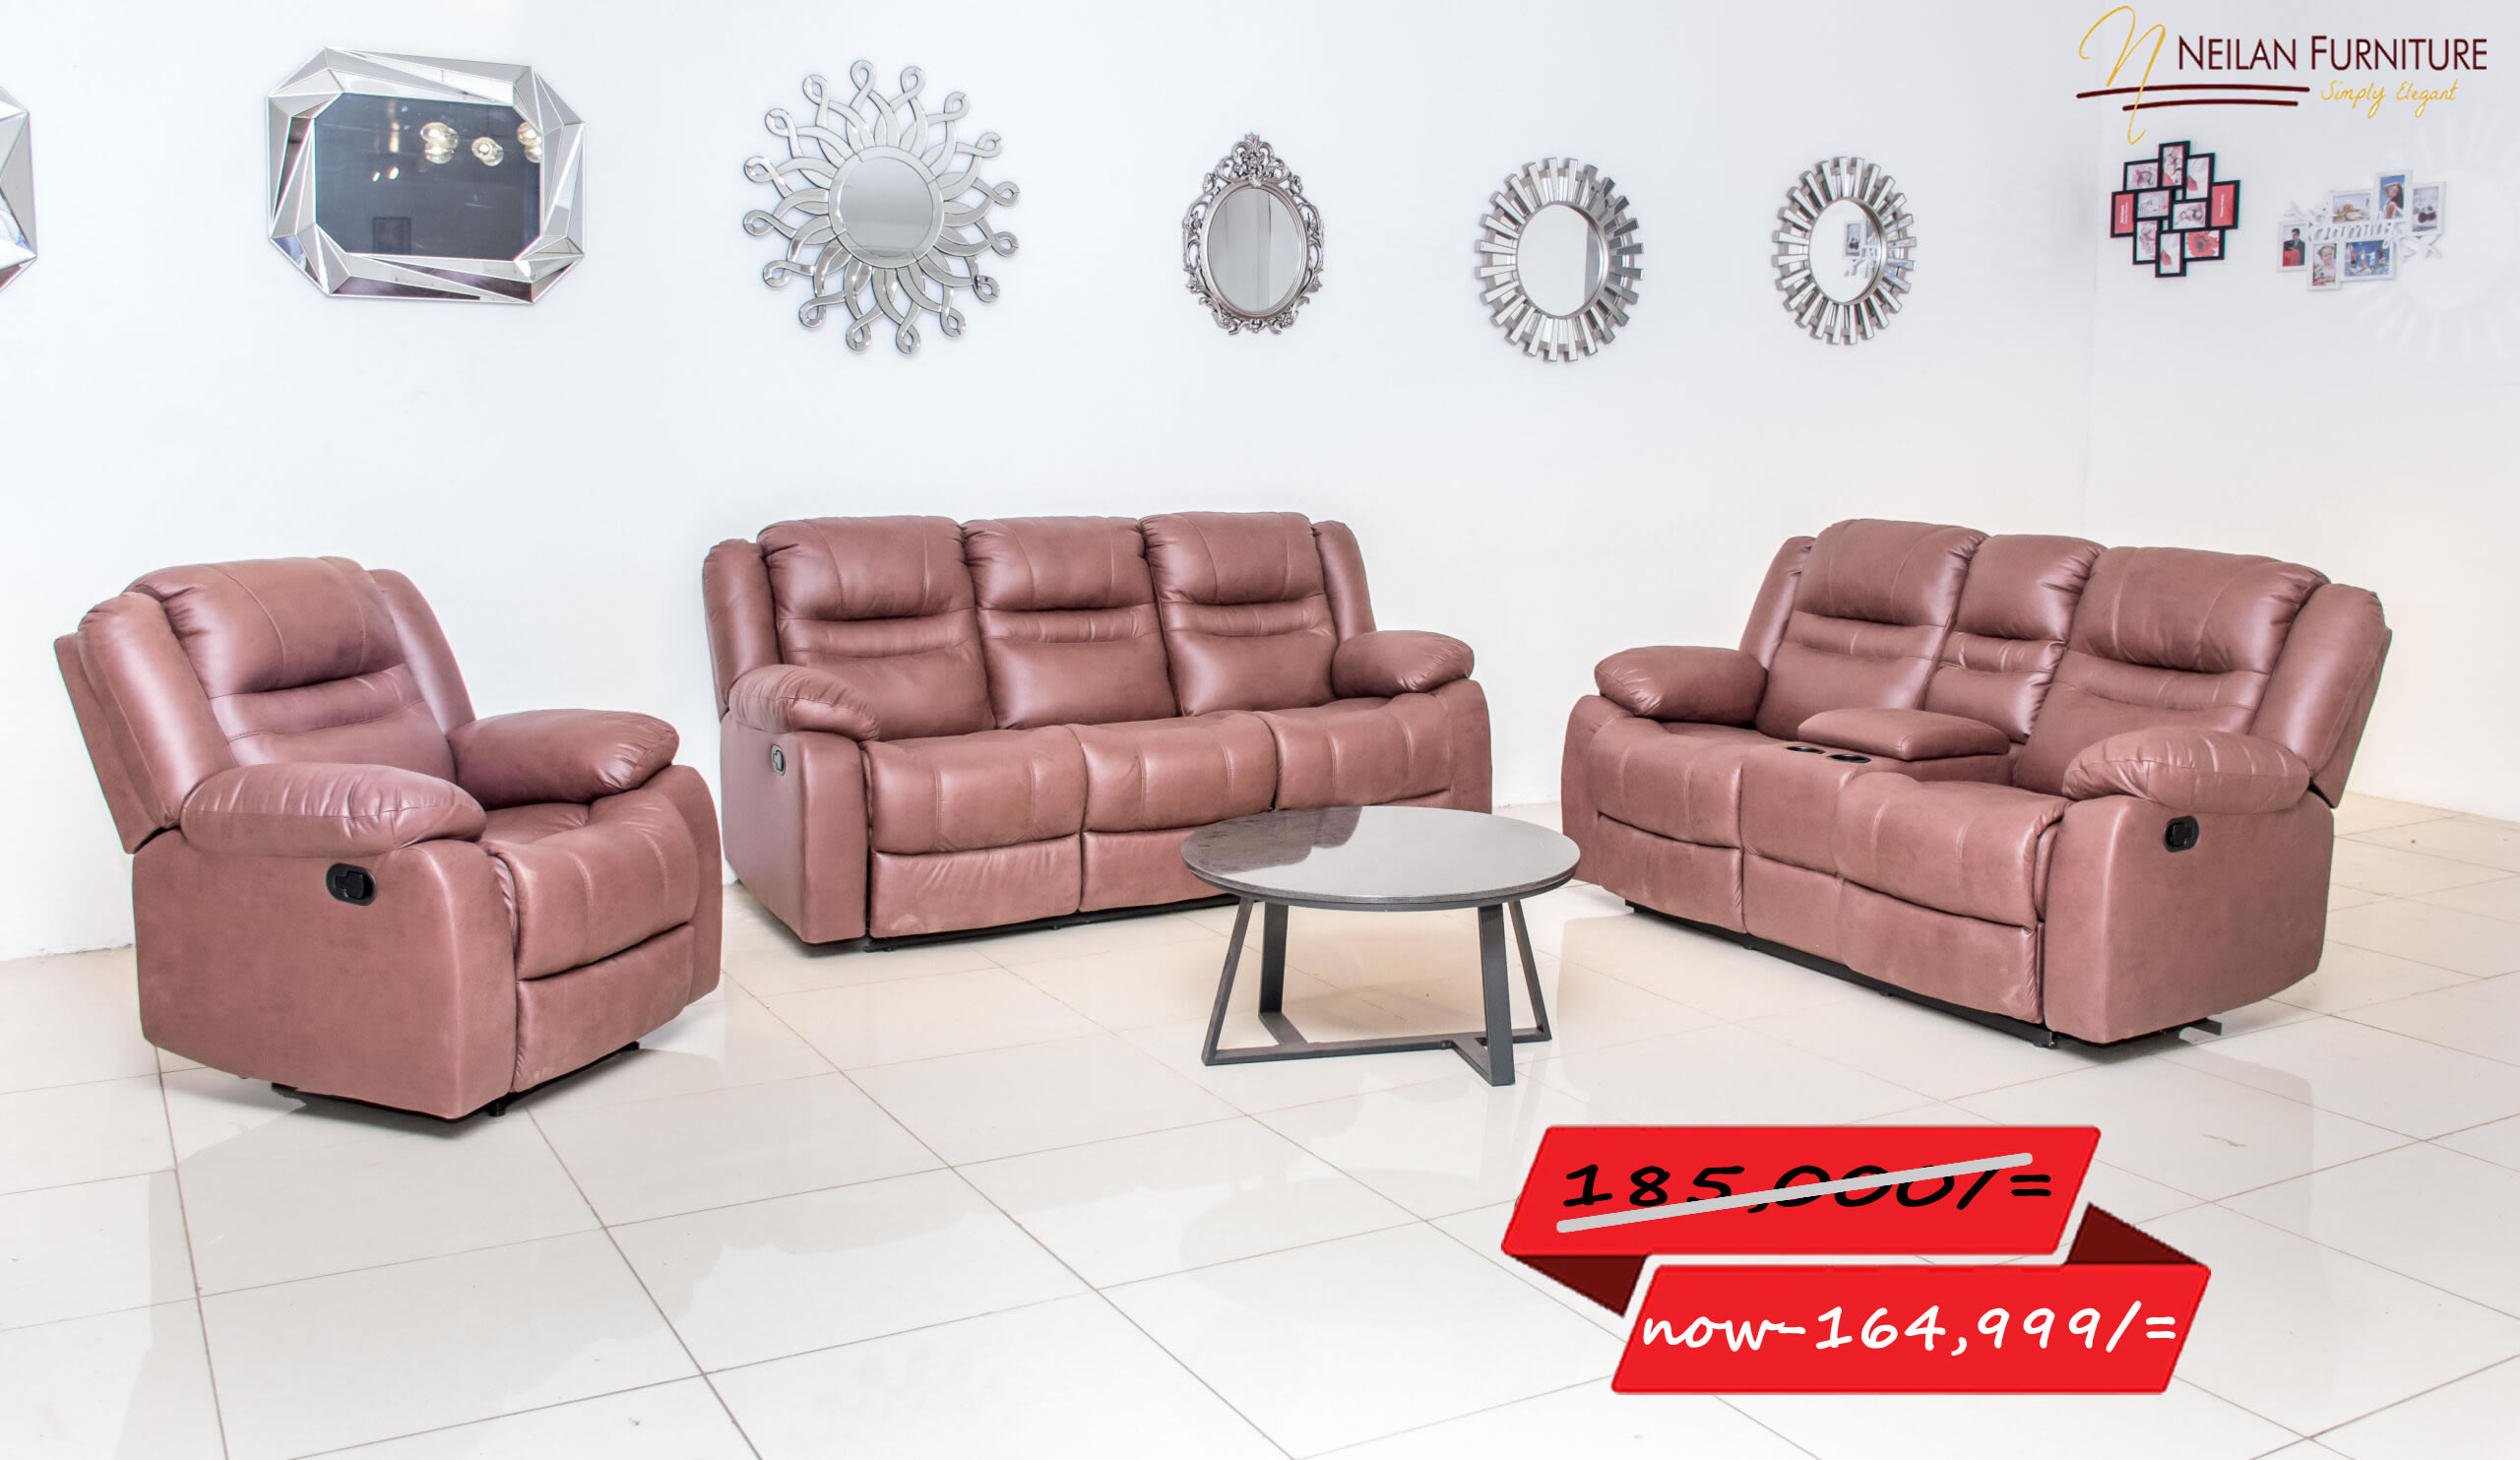 Read more about the article Neilan Furniture Store in Kisumu